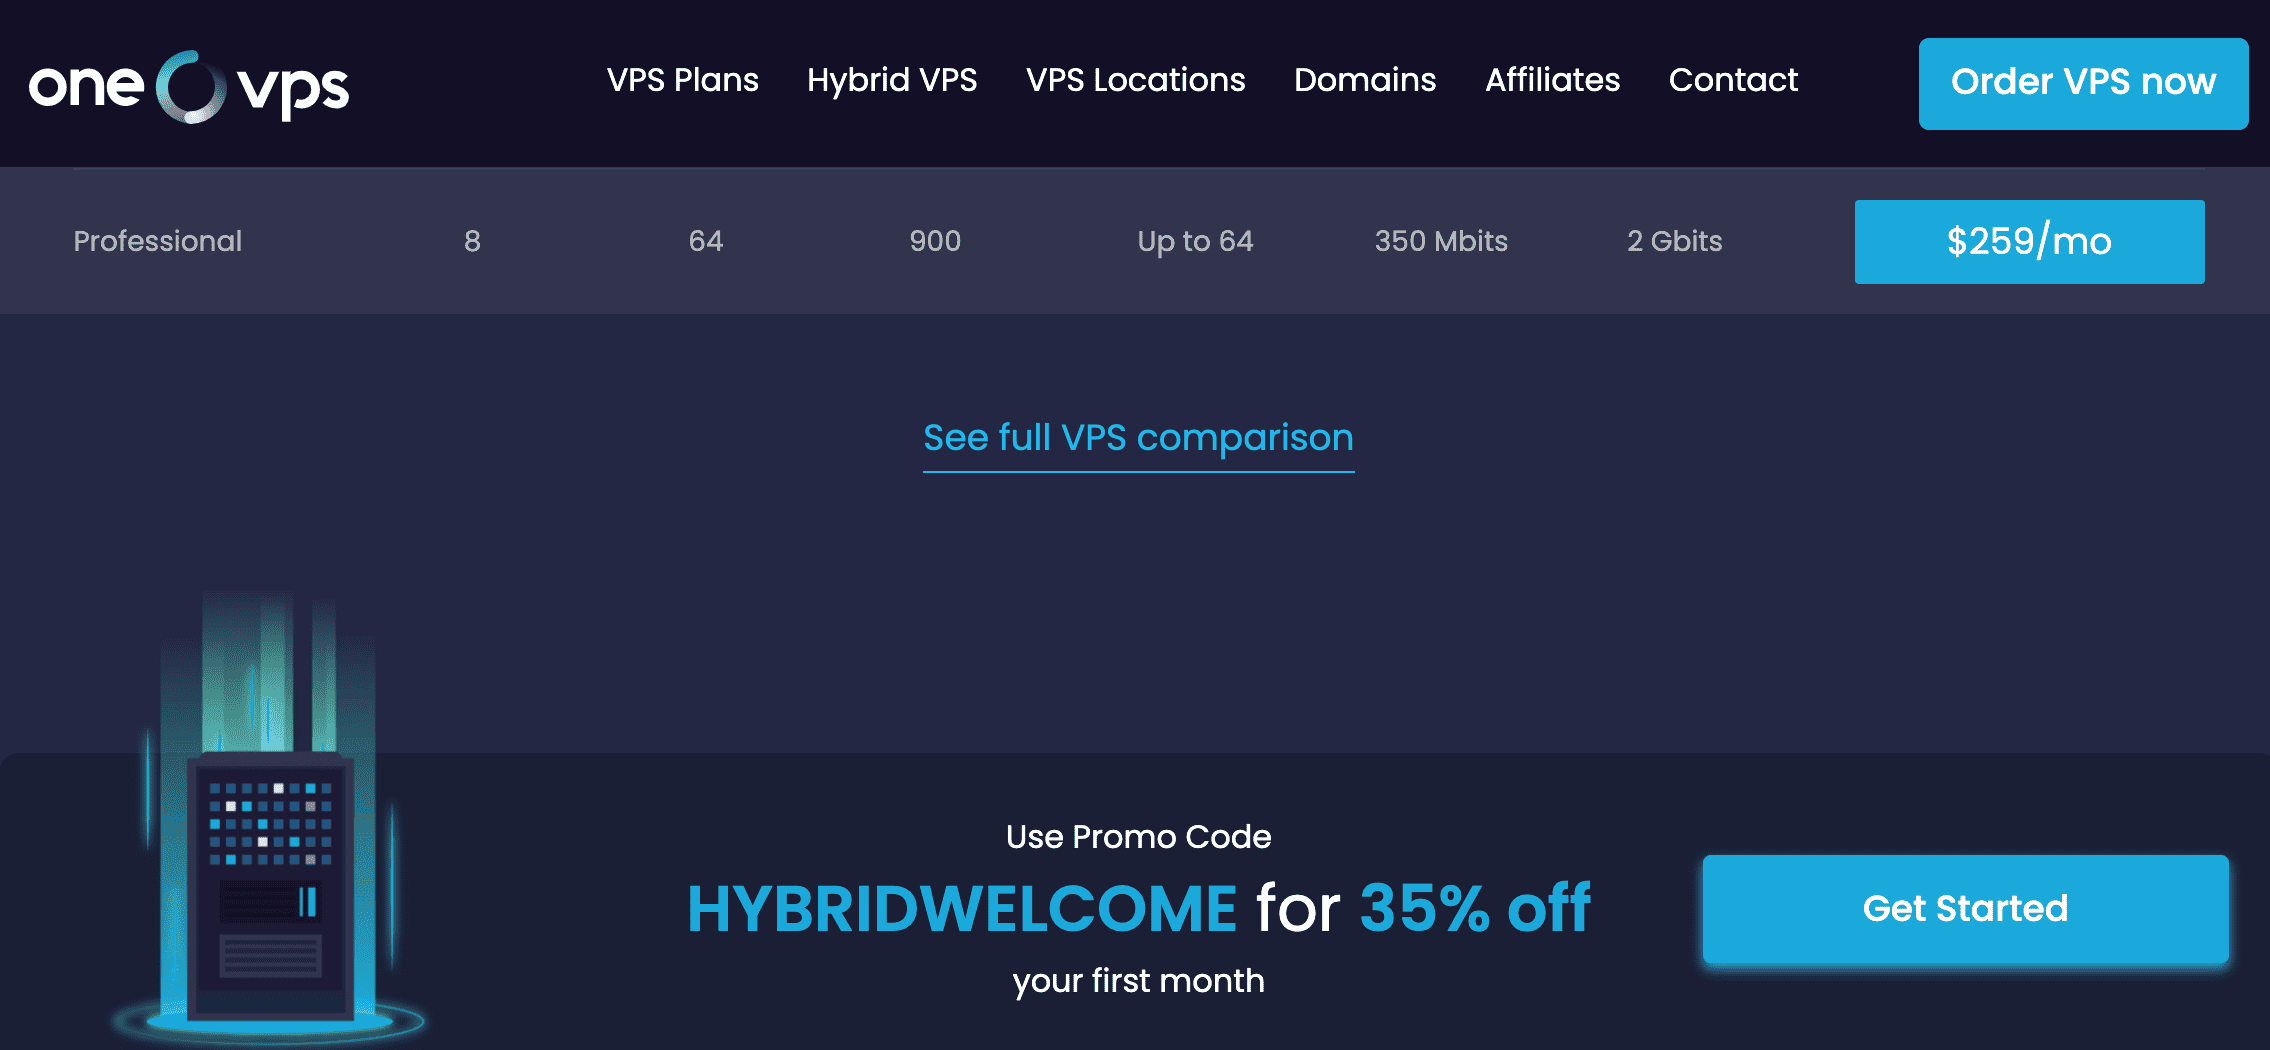 35% off OneVPS coupon code 2023 for Hybrid plan